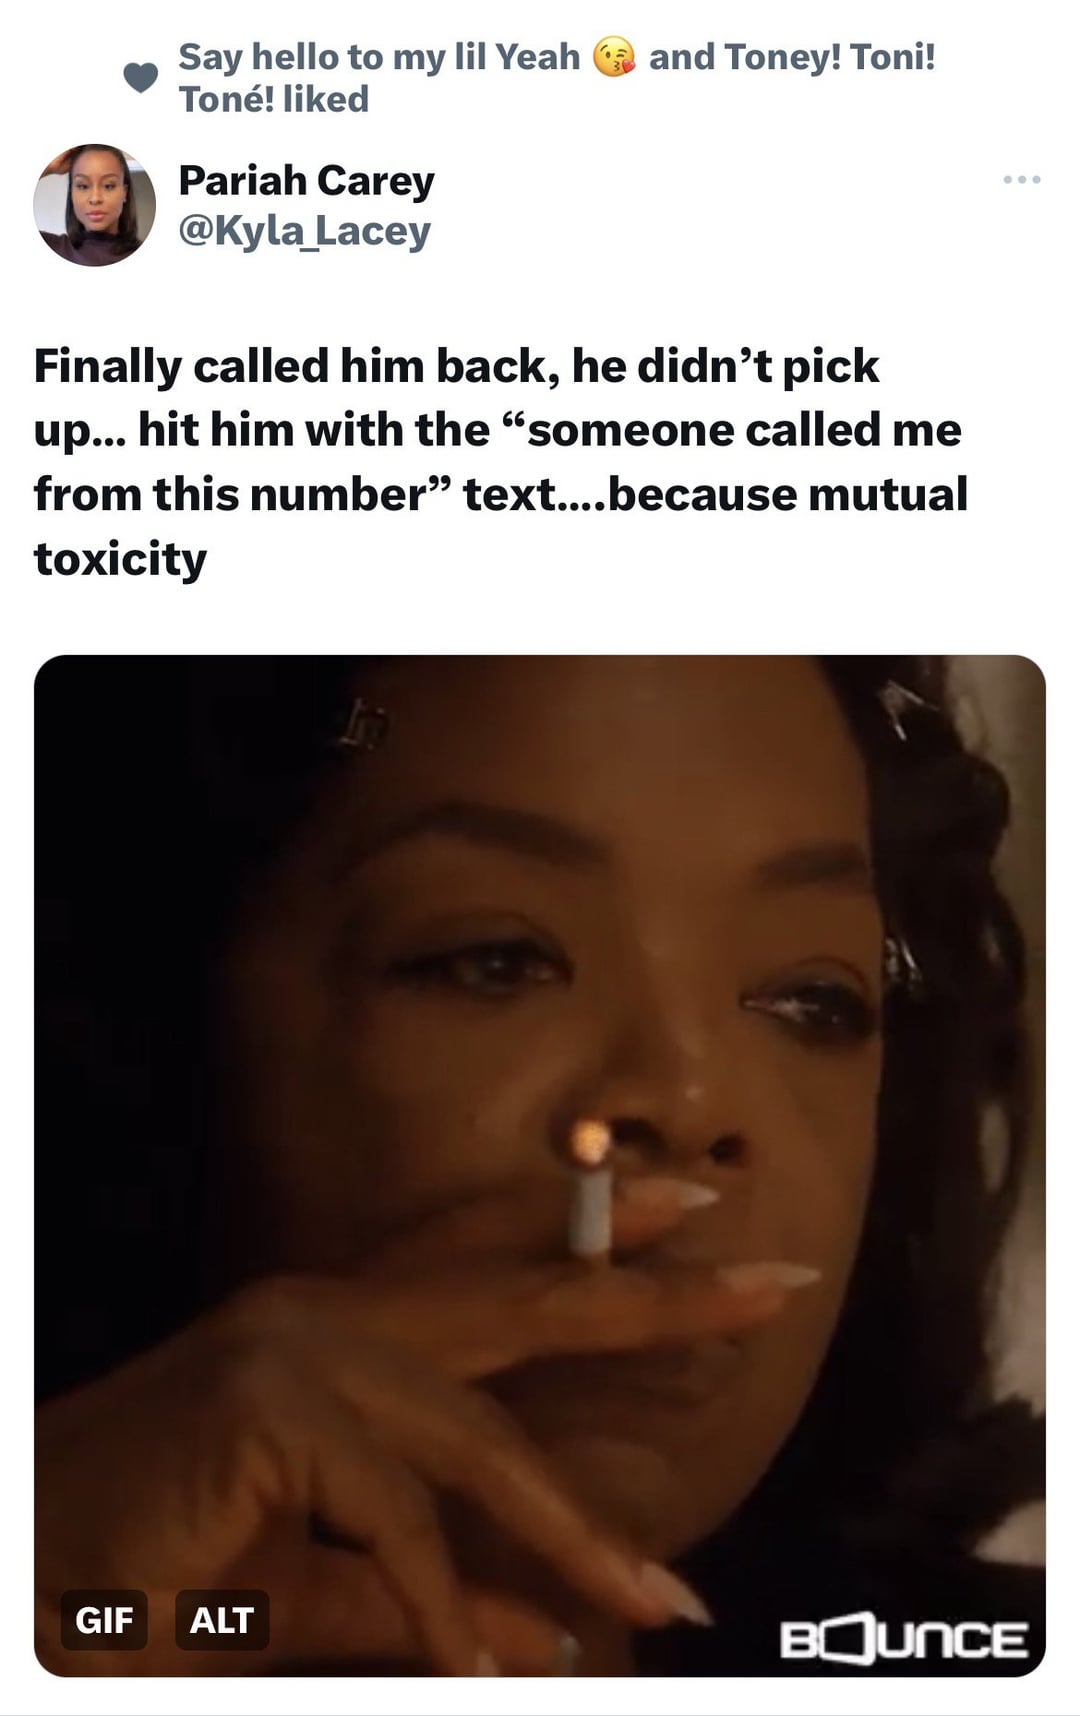 funny tweets and twitter memes - head - Say hello to my lil Yeah and Toney! Toni! Ton! d Pariah Carey Finally called him back, he didn't pick up... hit him with the "someone called me from this number" text....because mutual toxicity Gif Alt Bounce